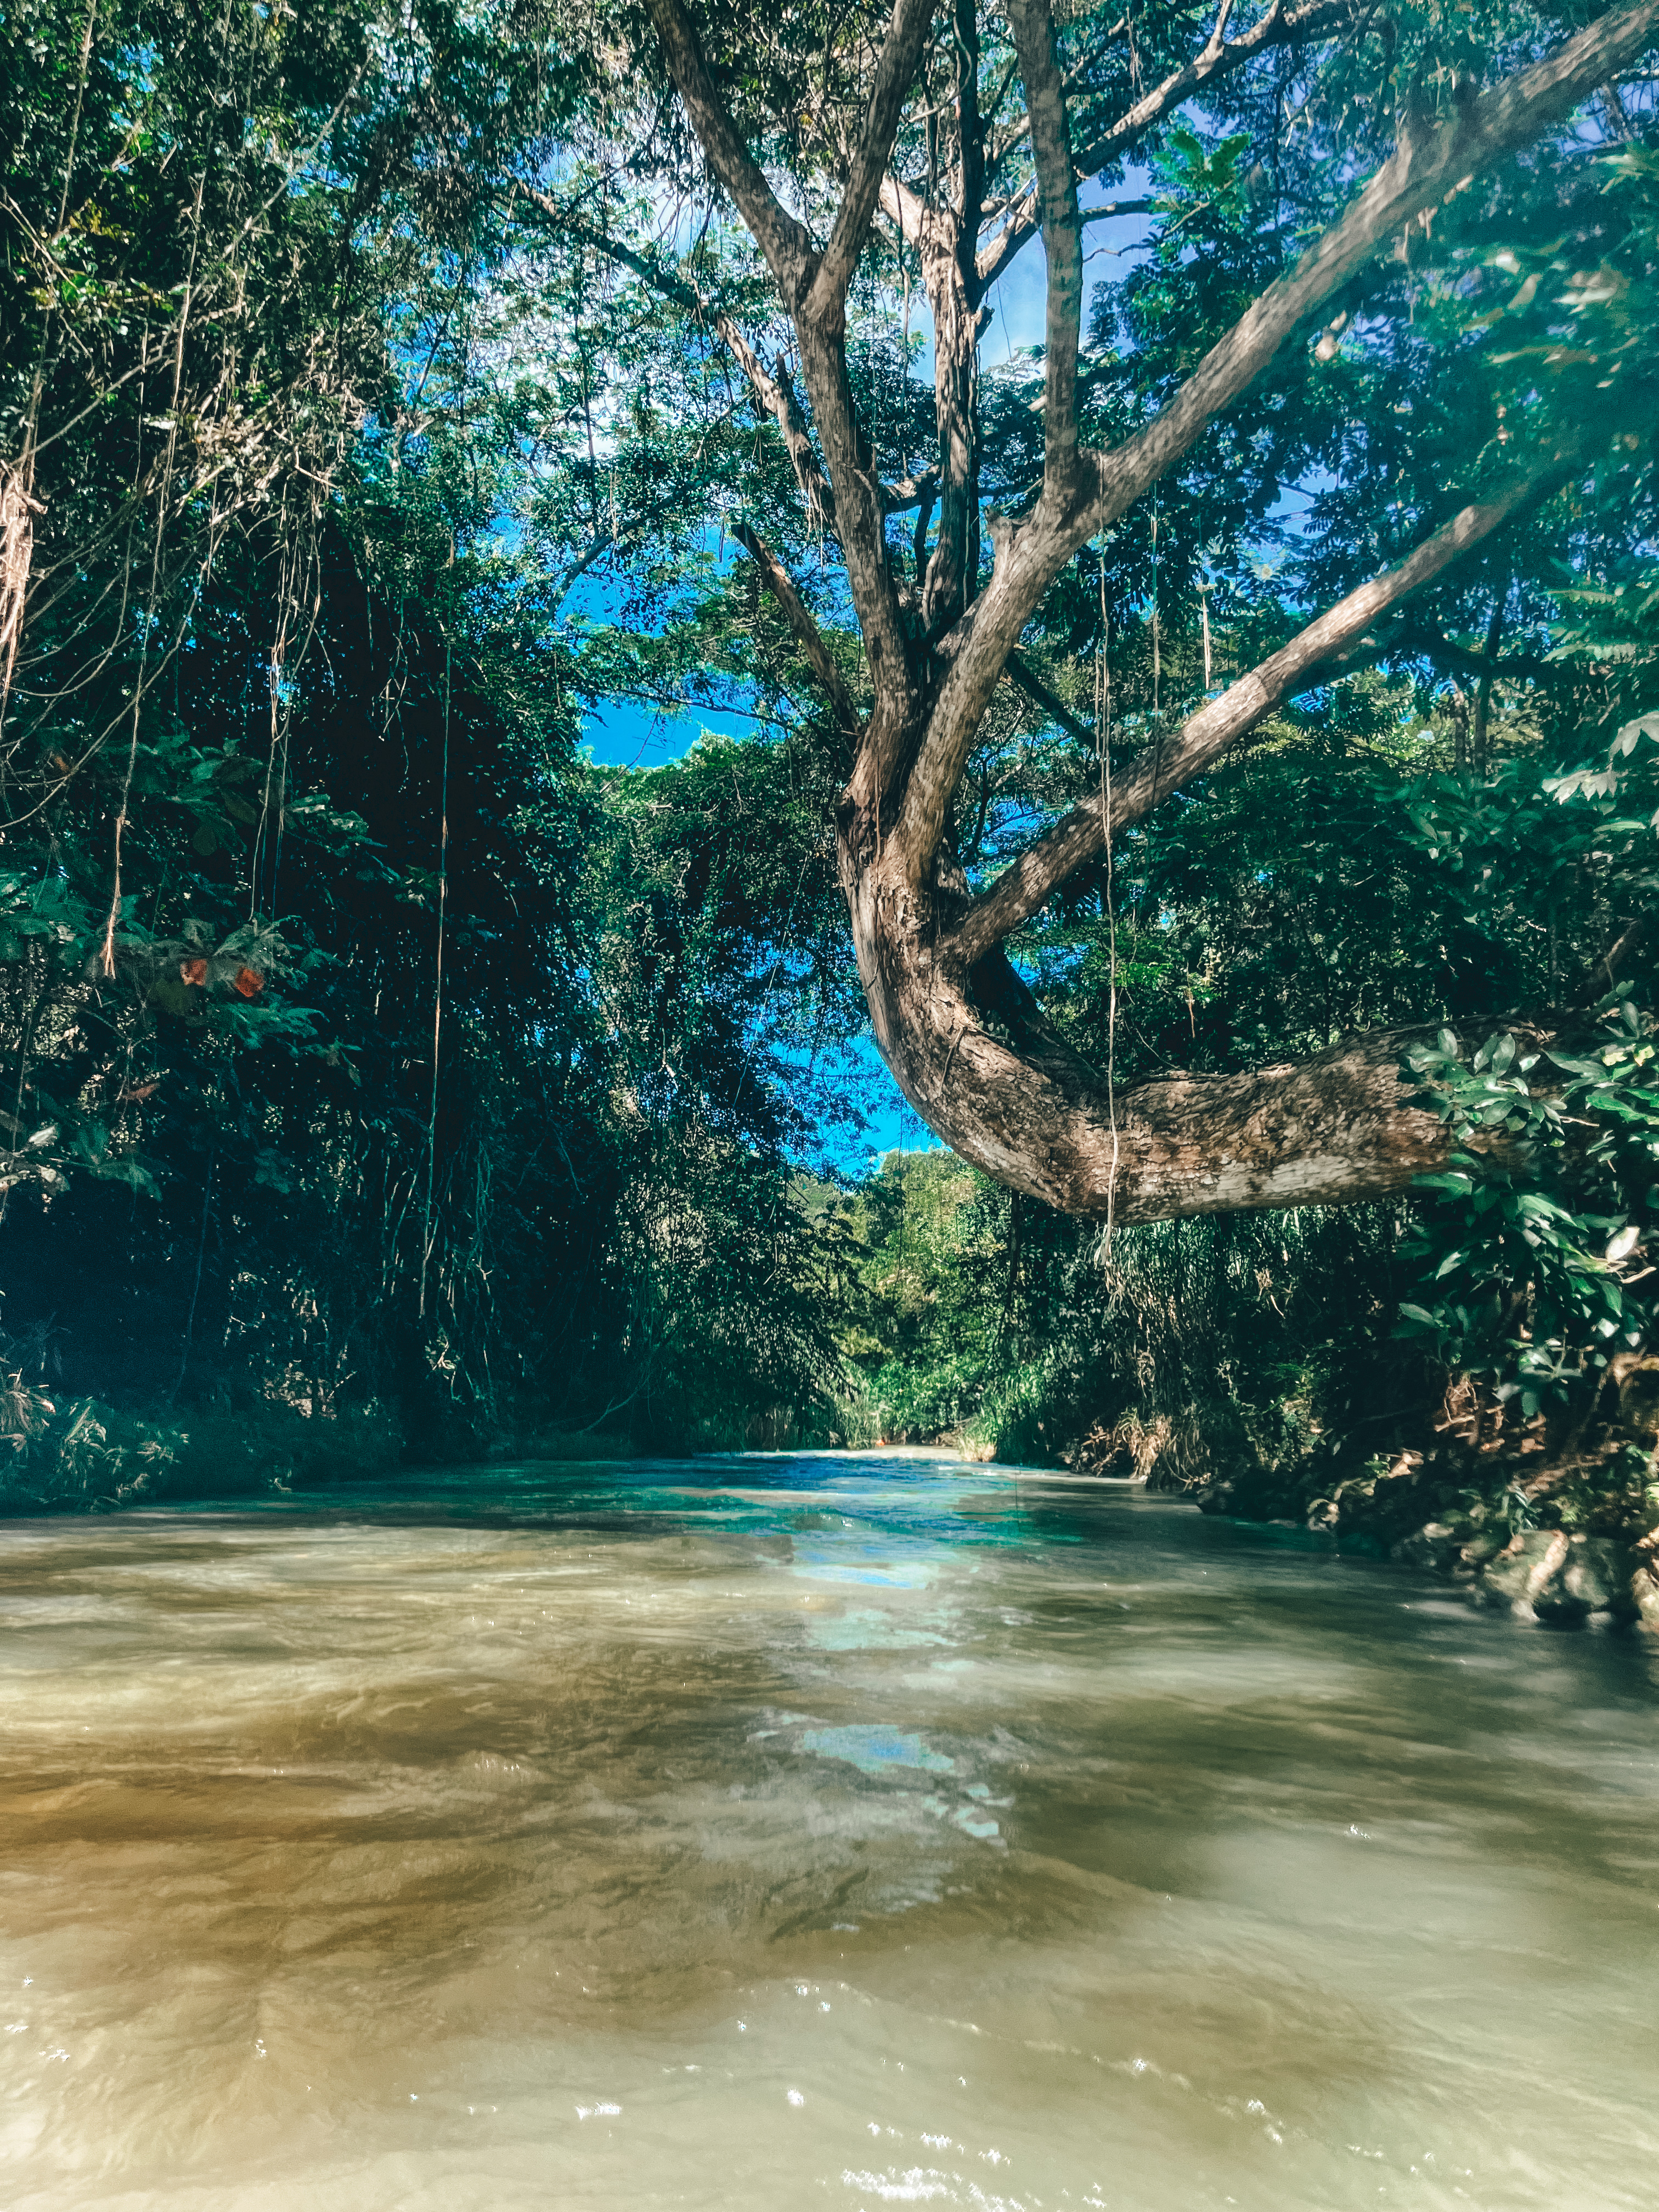 A serene river gently flows through a lush jungle in Falmouth, Jamaica, with sunlight filtering through the dense canopy and reflecting off the water's surface, while a large, twisted tree with hanging vines anchors the scene